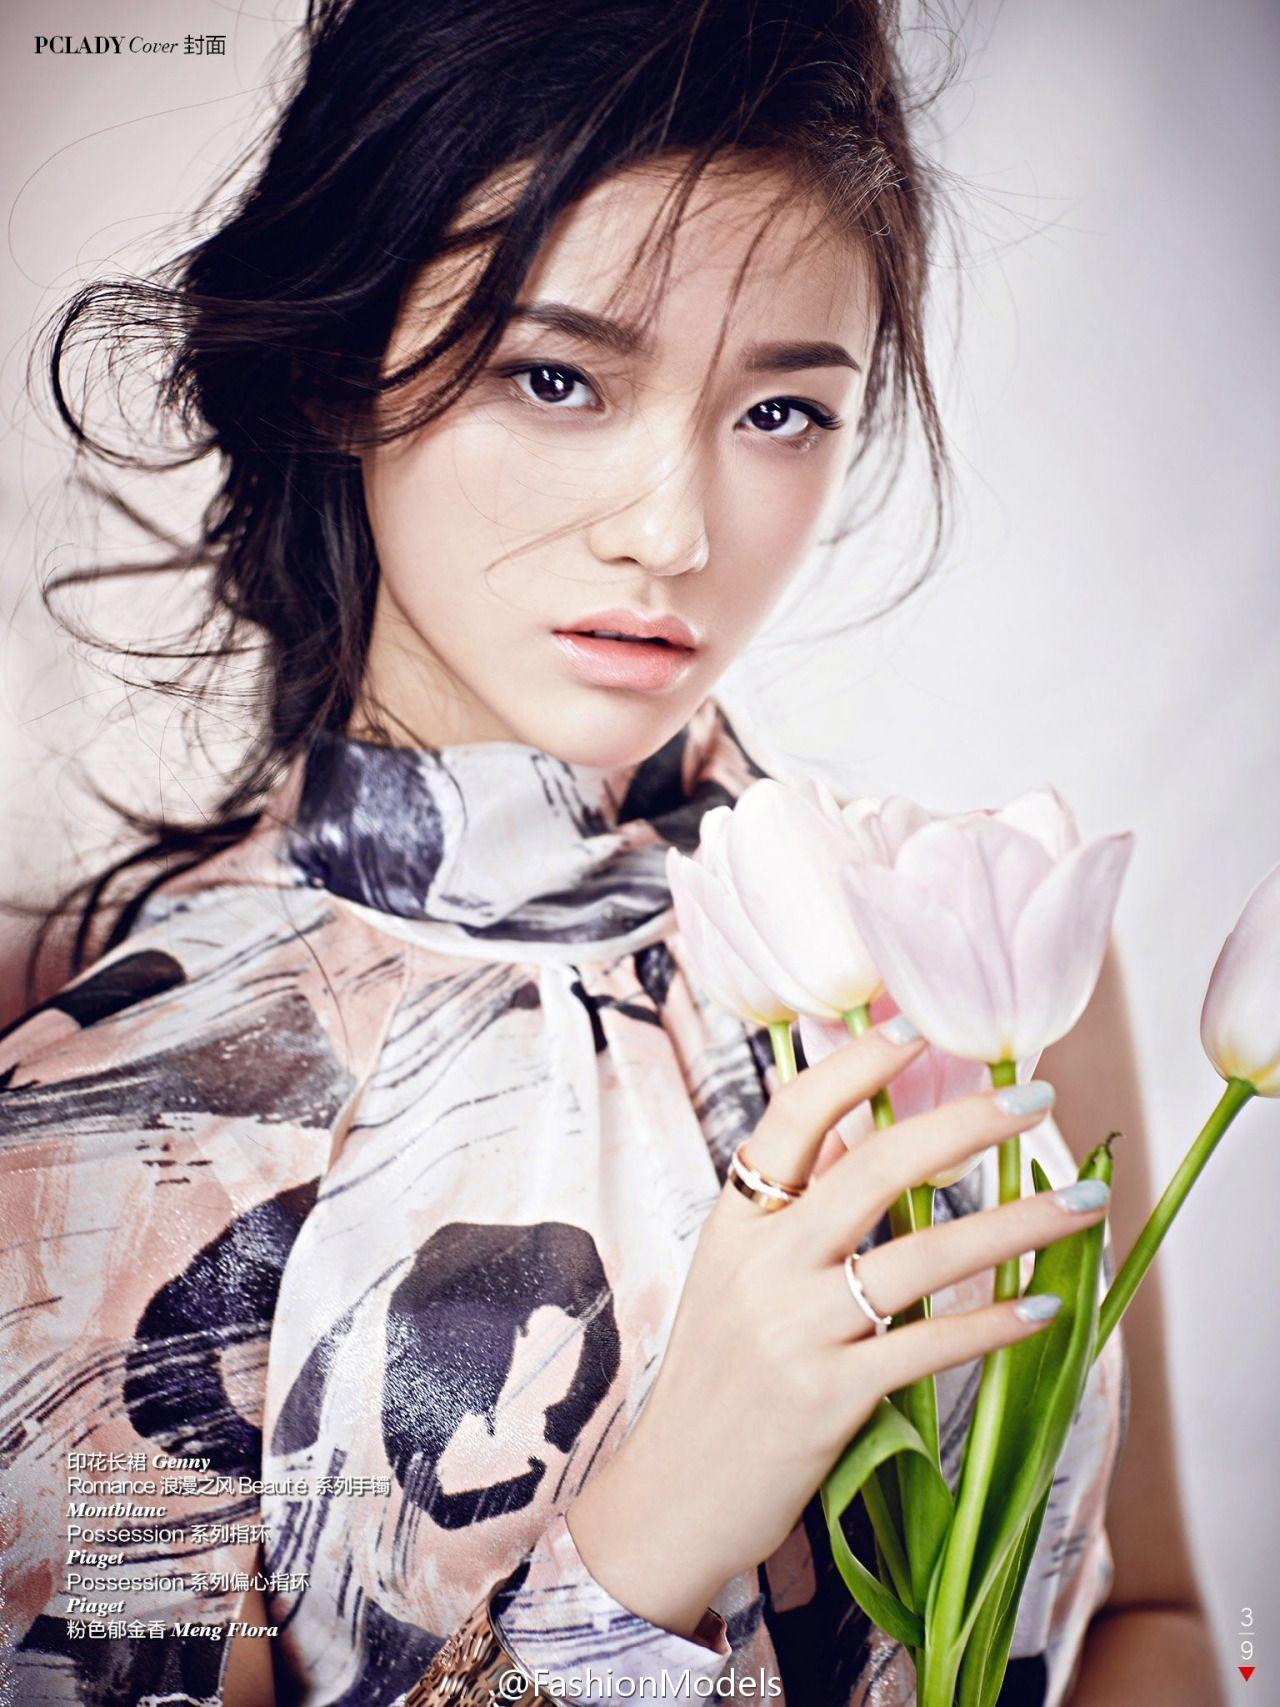 Mermaid star Lin Yun for PC Lady. Asia. Asian beauty, Chinese